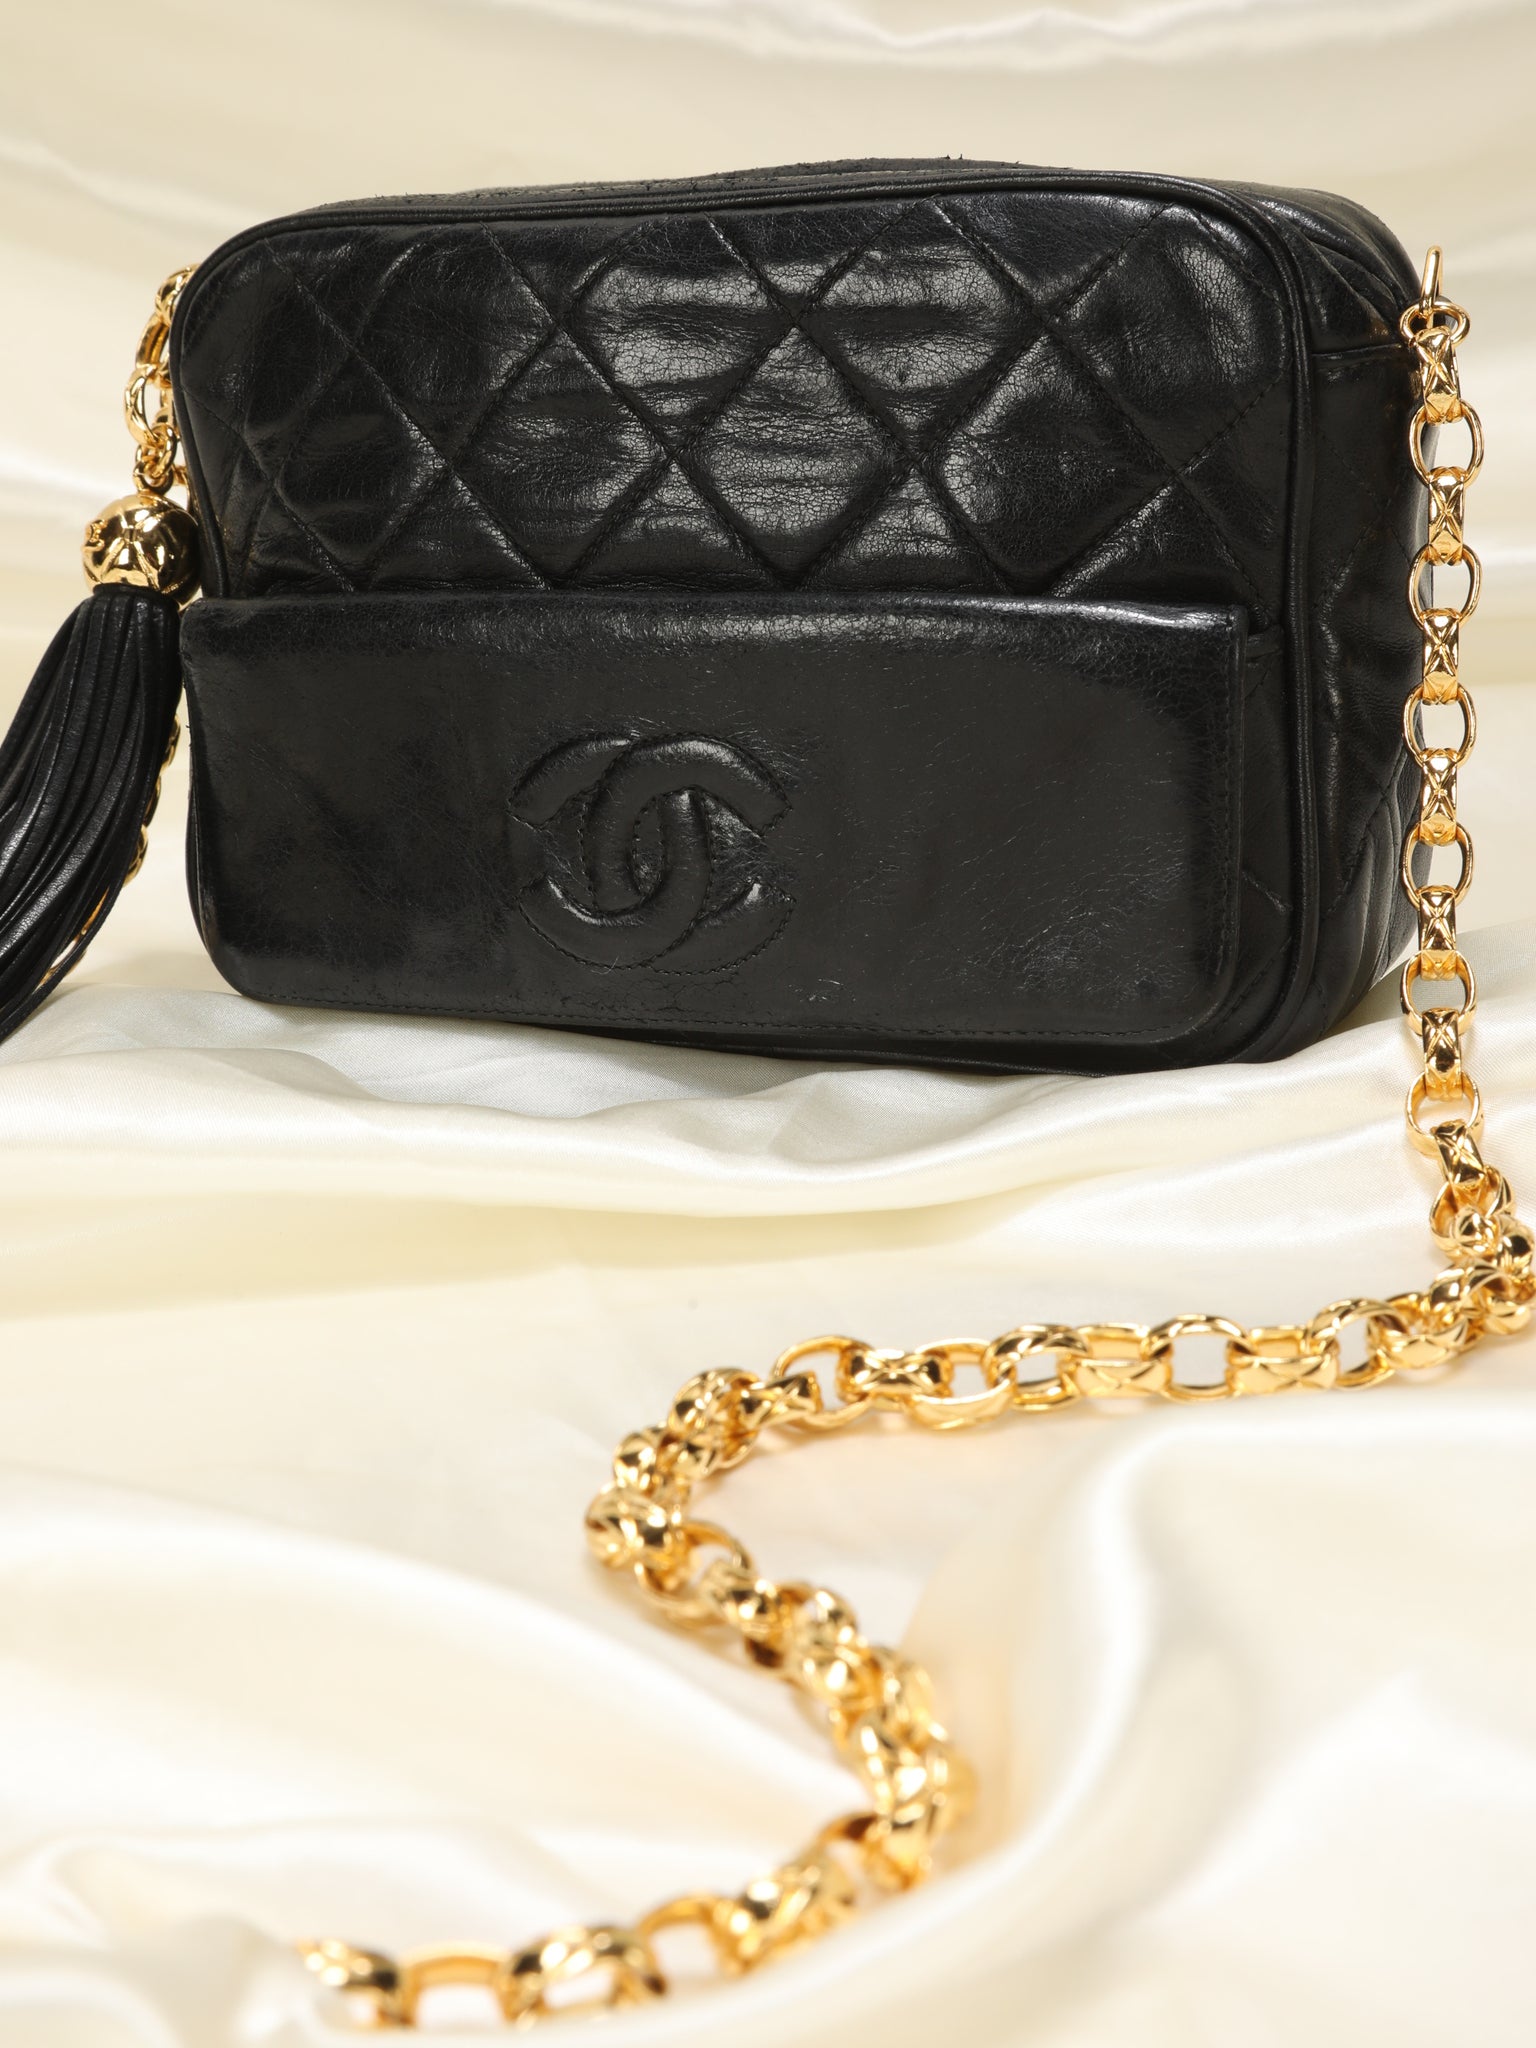 Authentic Chanel Lambskin Camera Bag